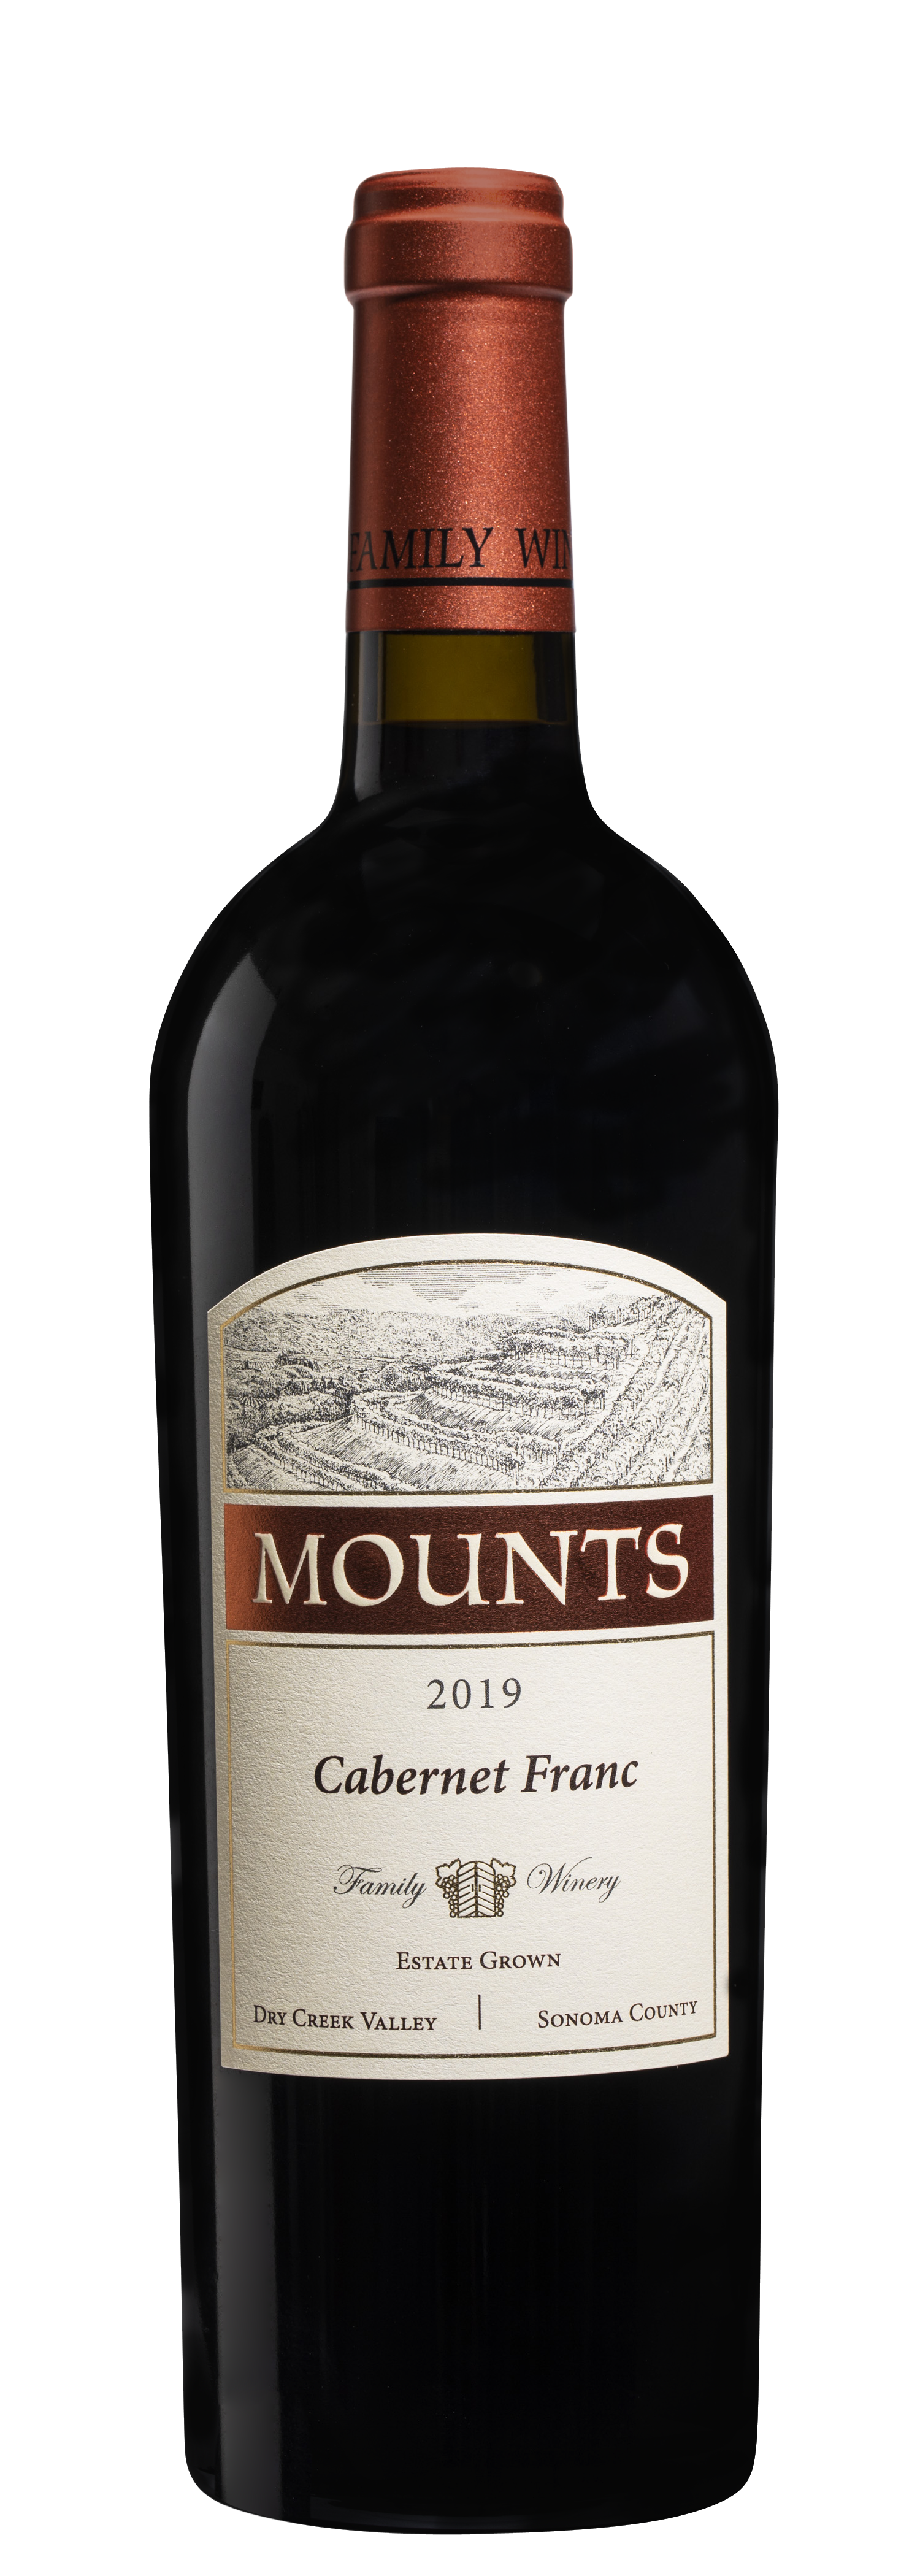 Product Image for 2019 Mounts Cabernet Franc Estate Grown Dry Creek Valley